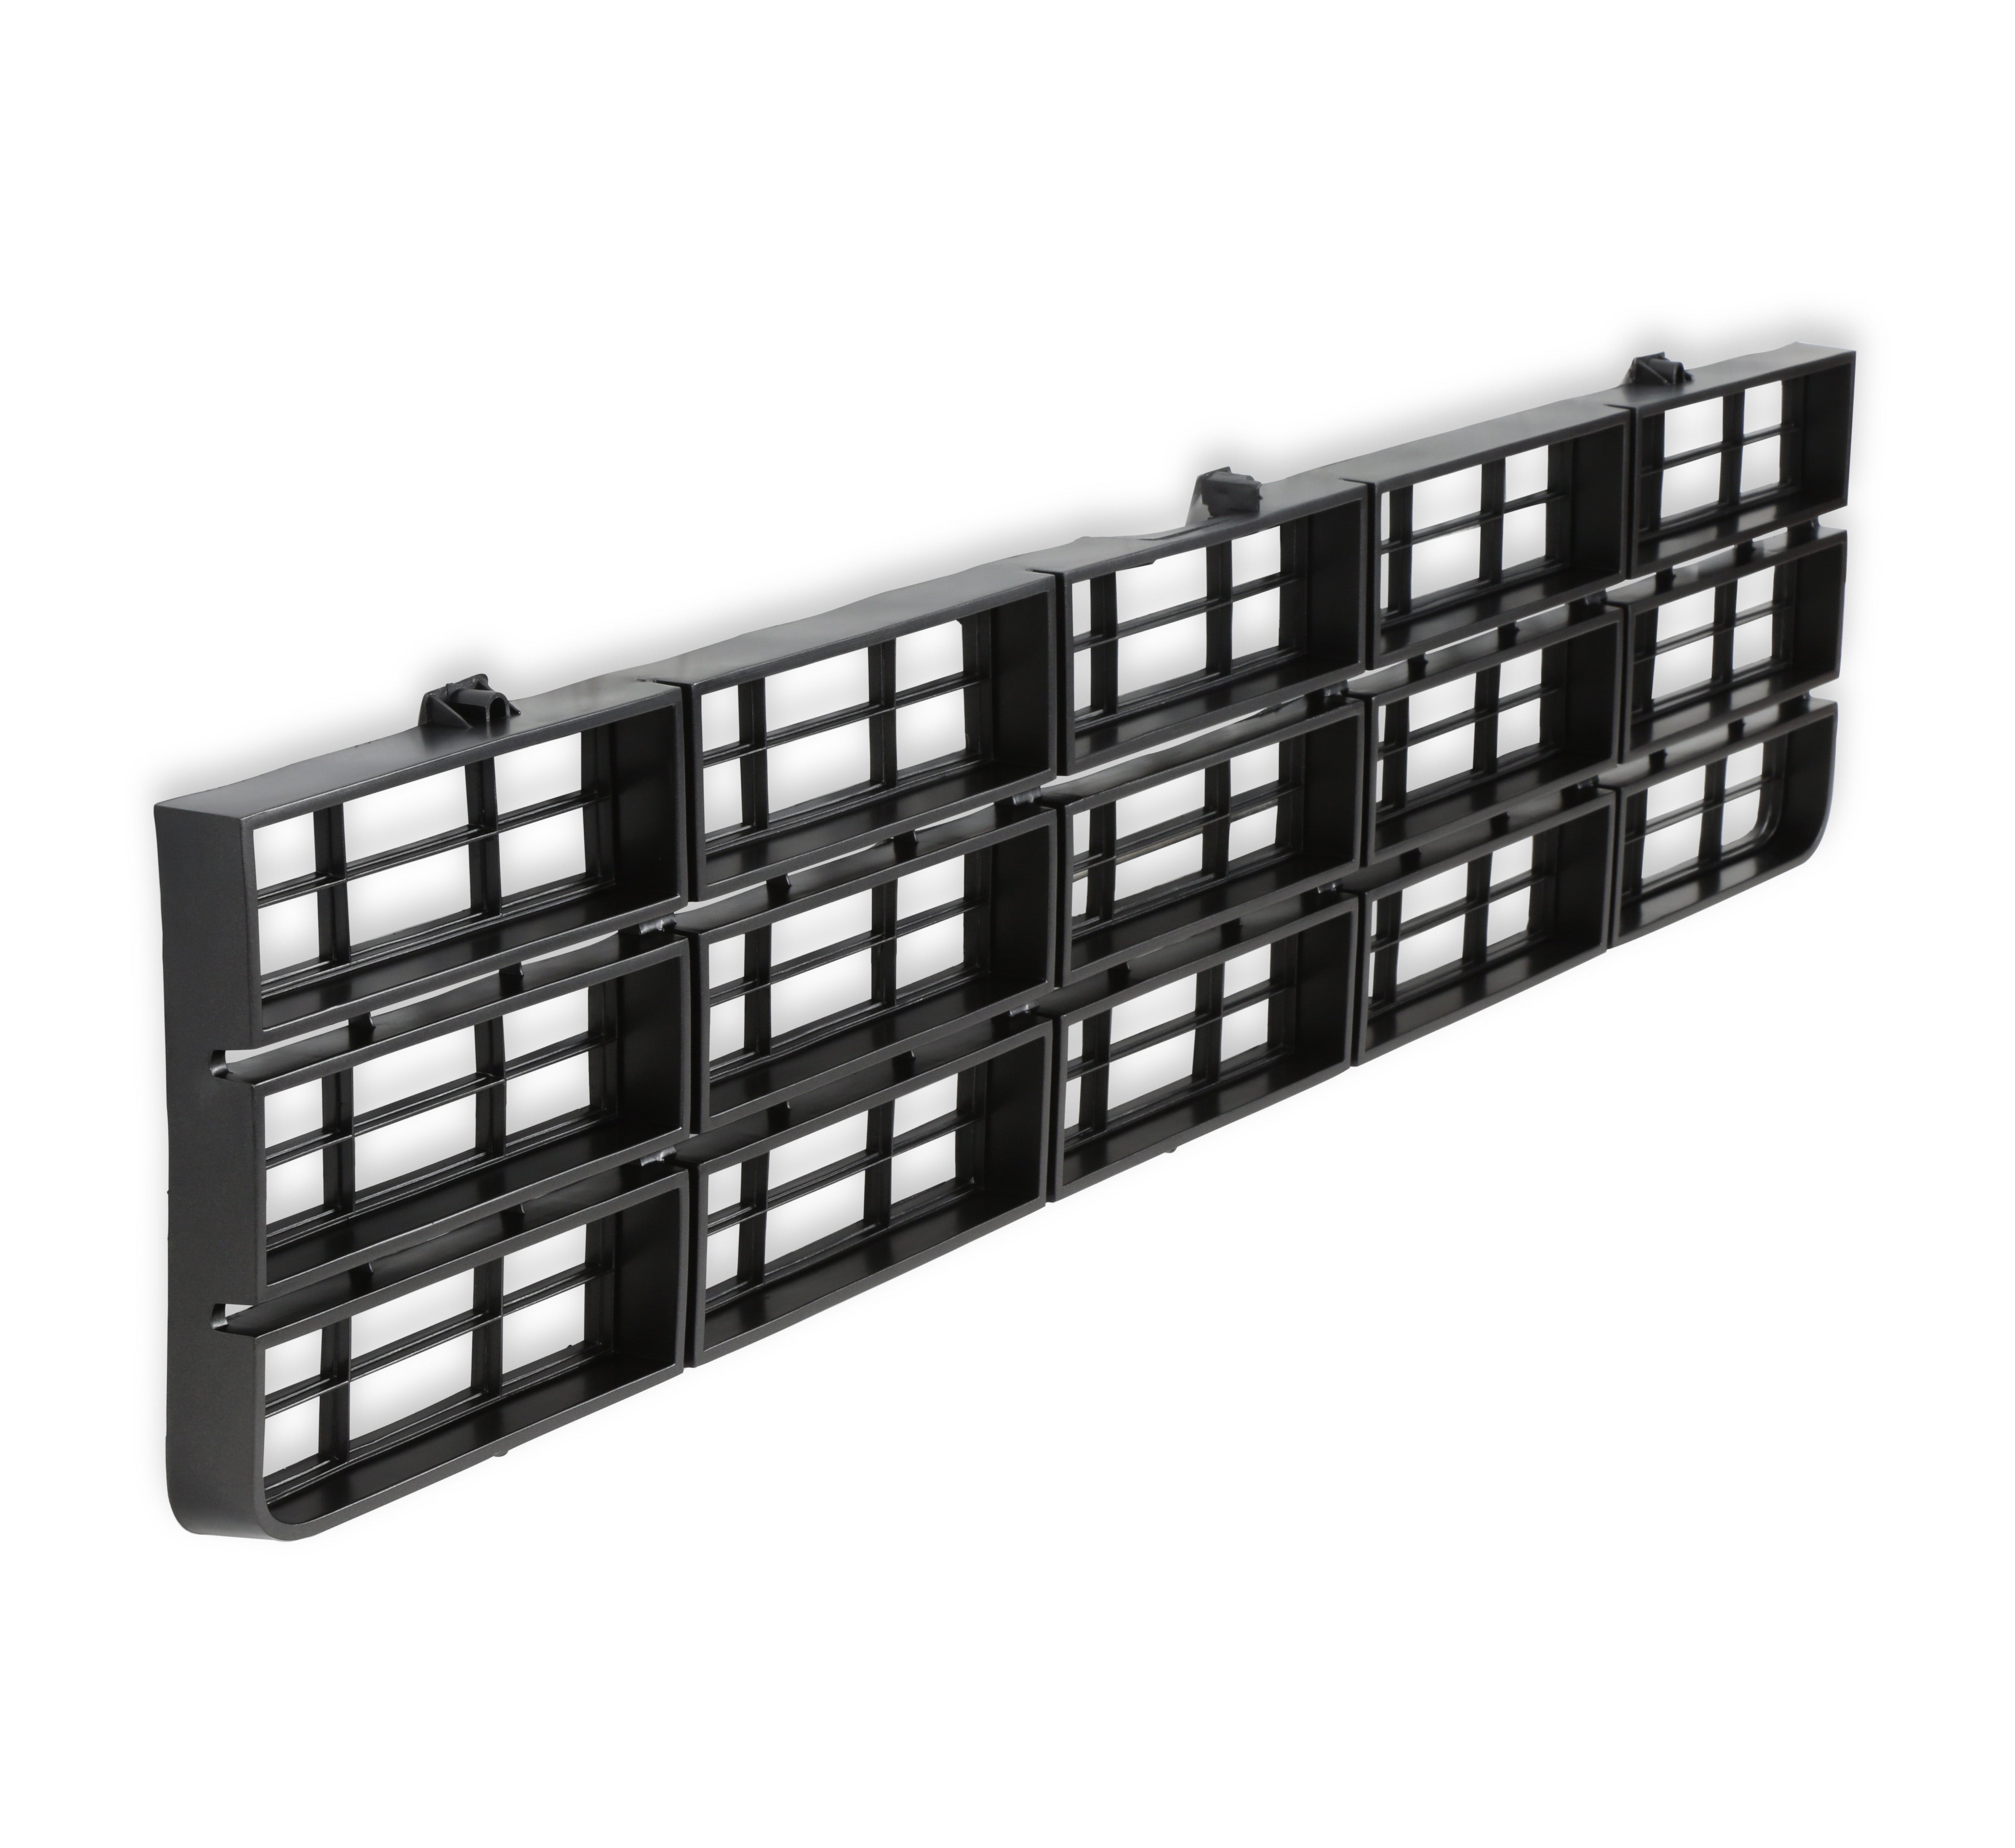 BROTHERS C/K Chevy Grille - w/o Bowtie - Dark Charcoal pn 04-309